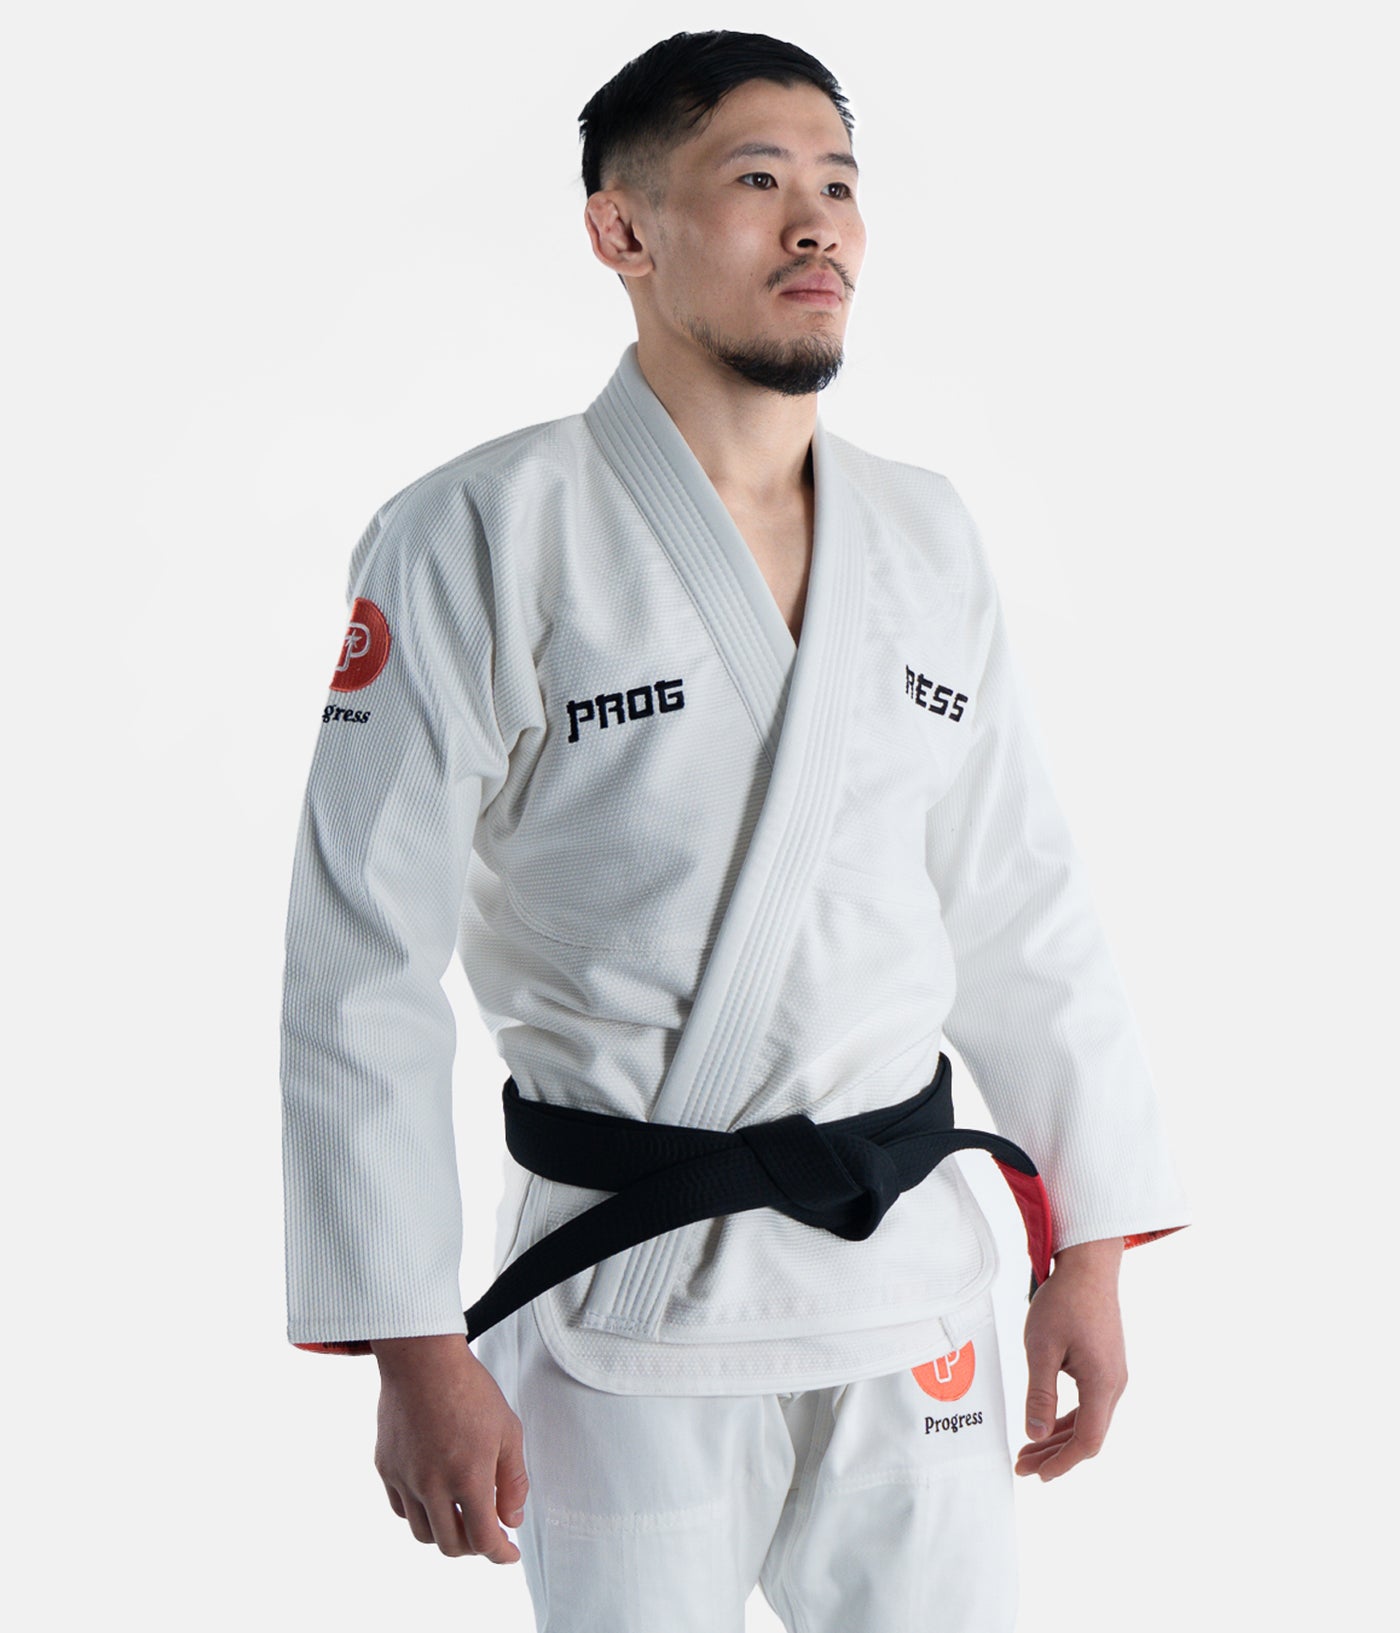 What makes a Progress Gi special?